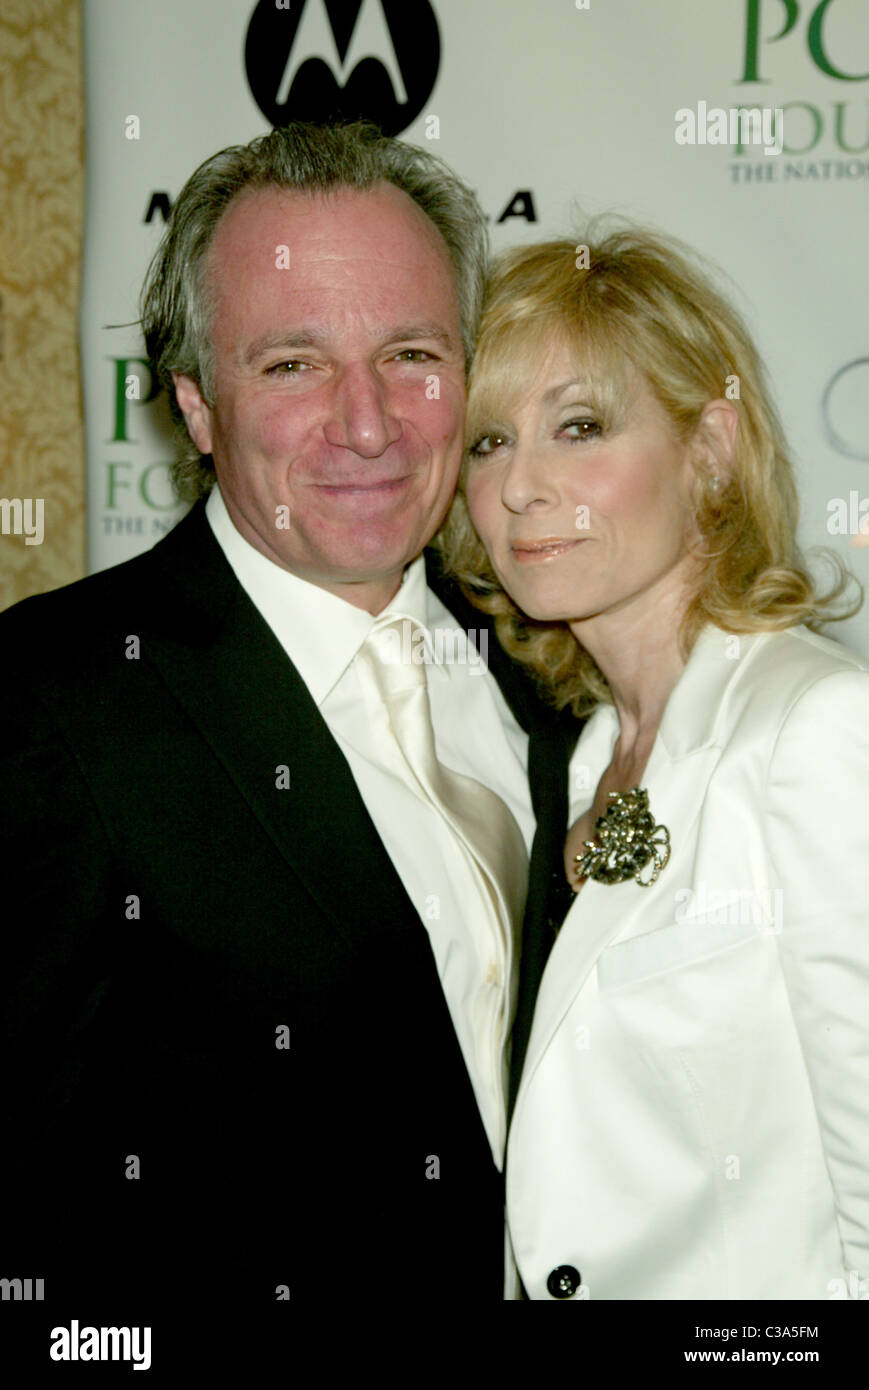 Robert Desiderio and Judith Light at the Point Foundation Gala held at the Roosevelt Hotel New York City, USA - 27.04.09 Stock Photo